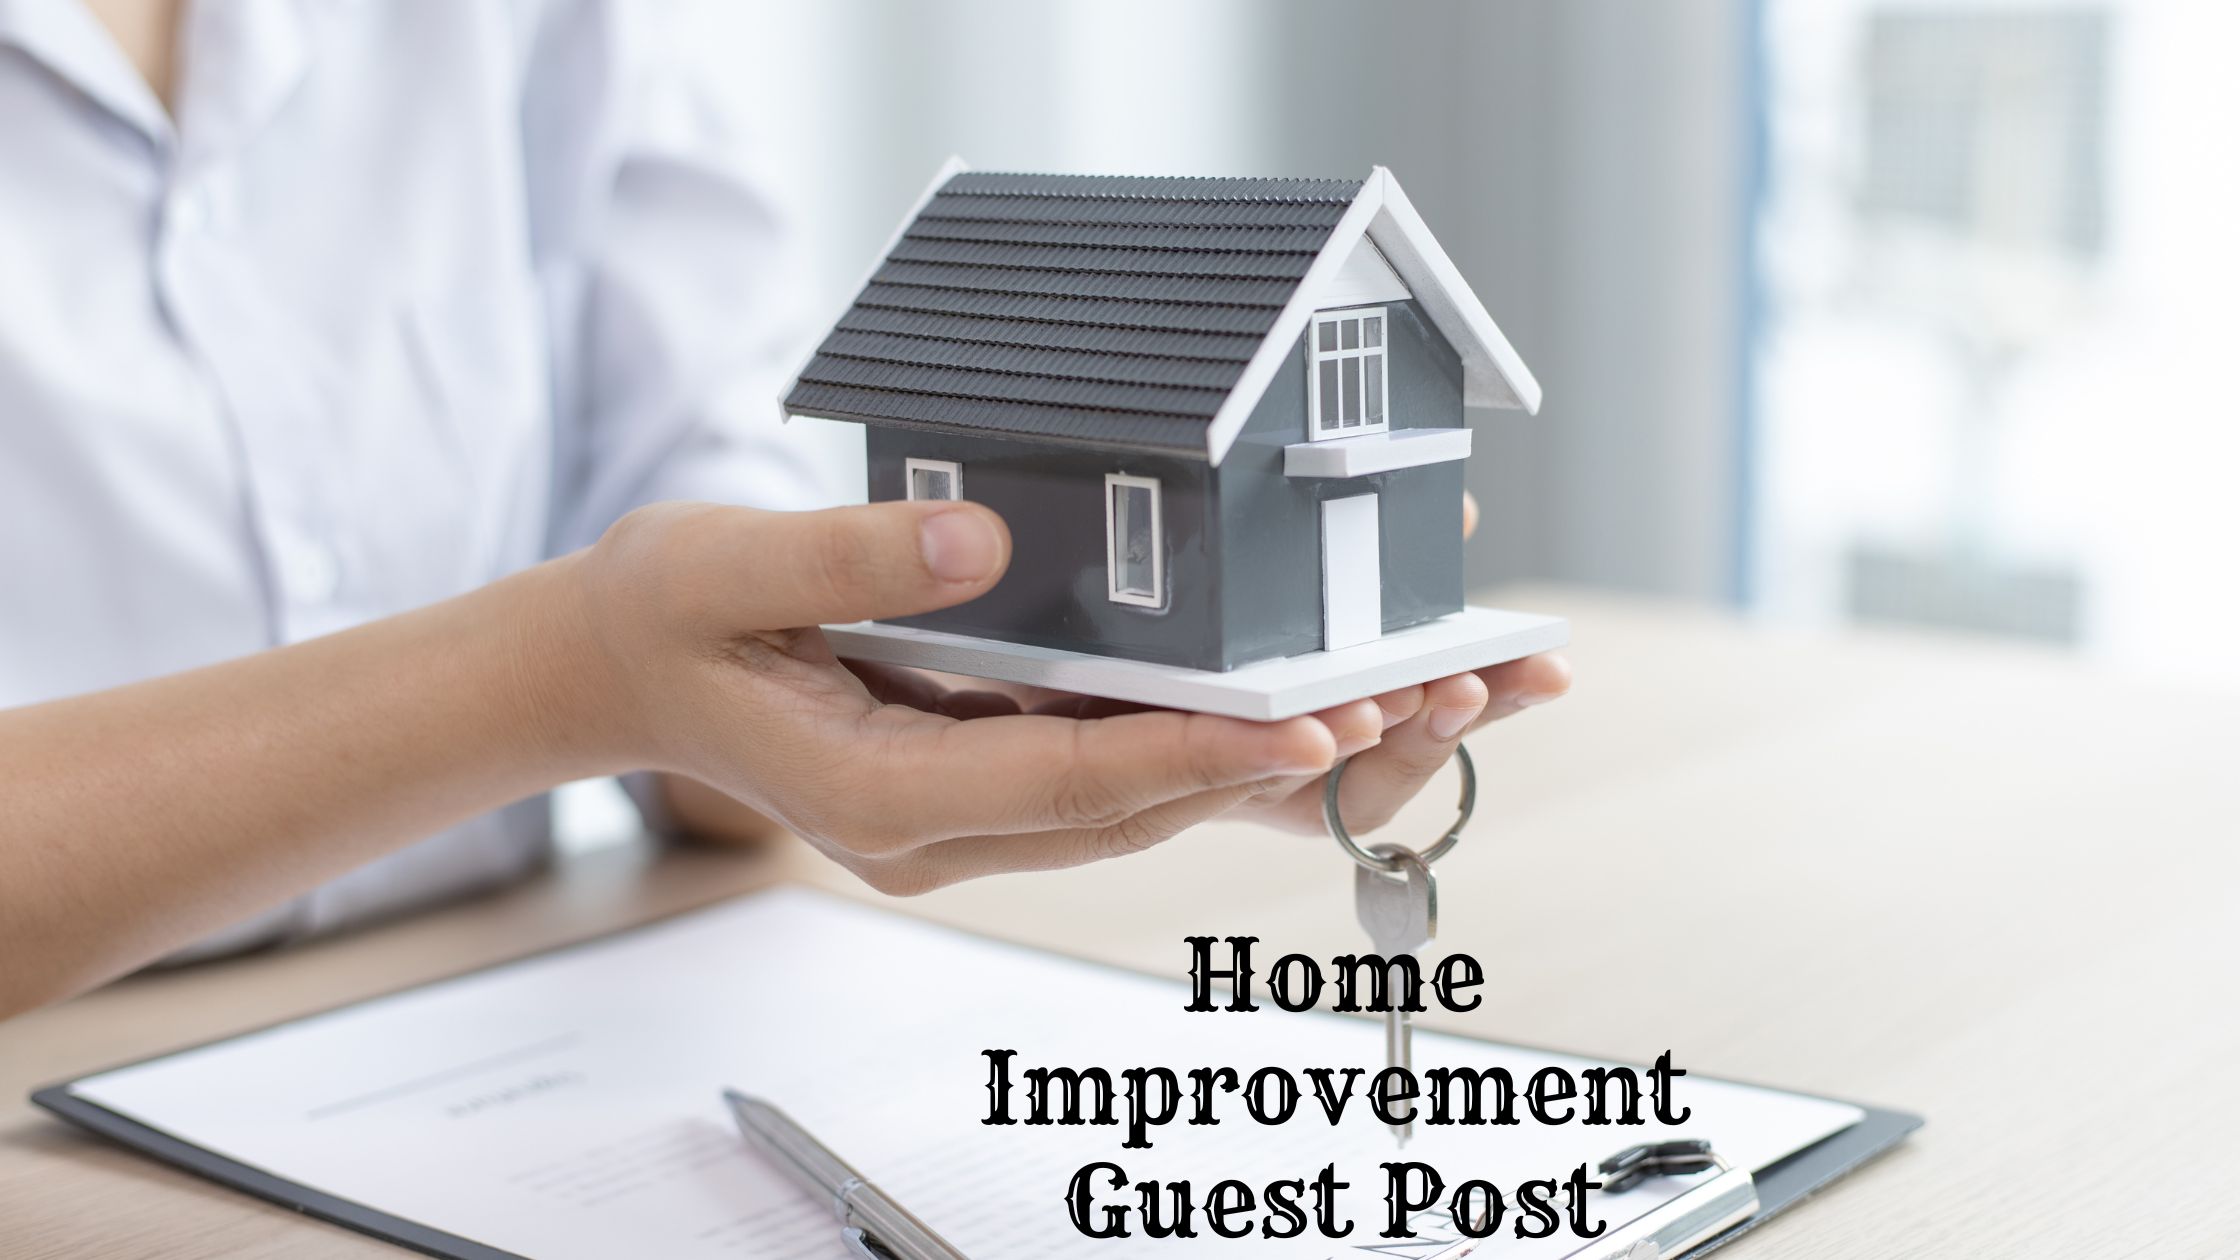 Importance of Home Improvement Guest Post